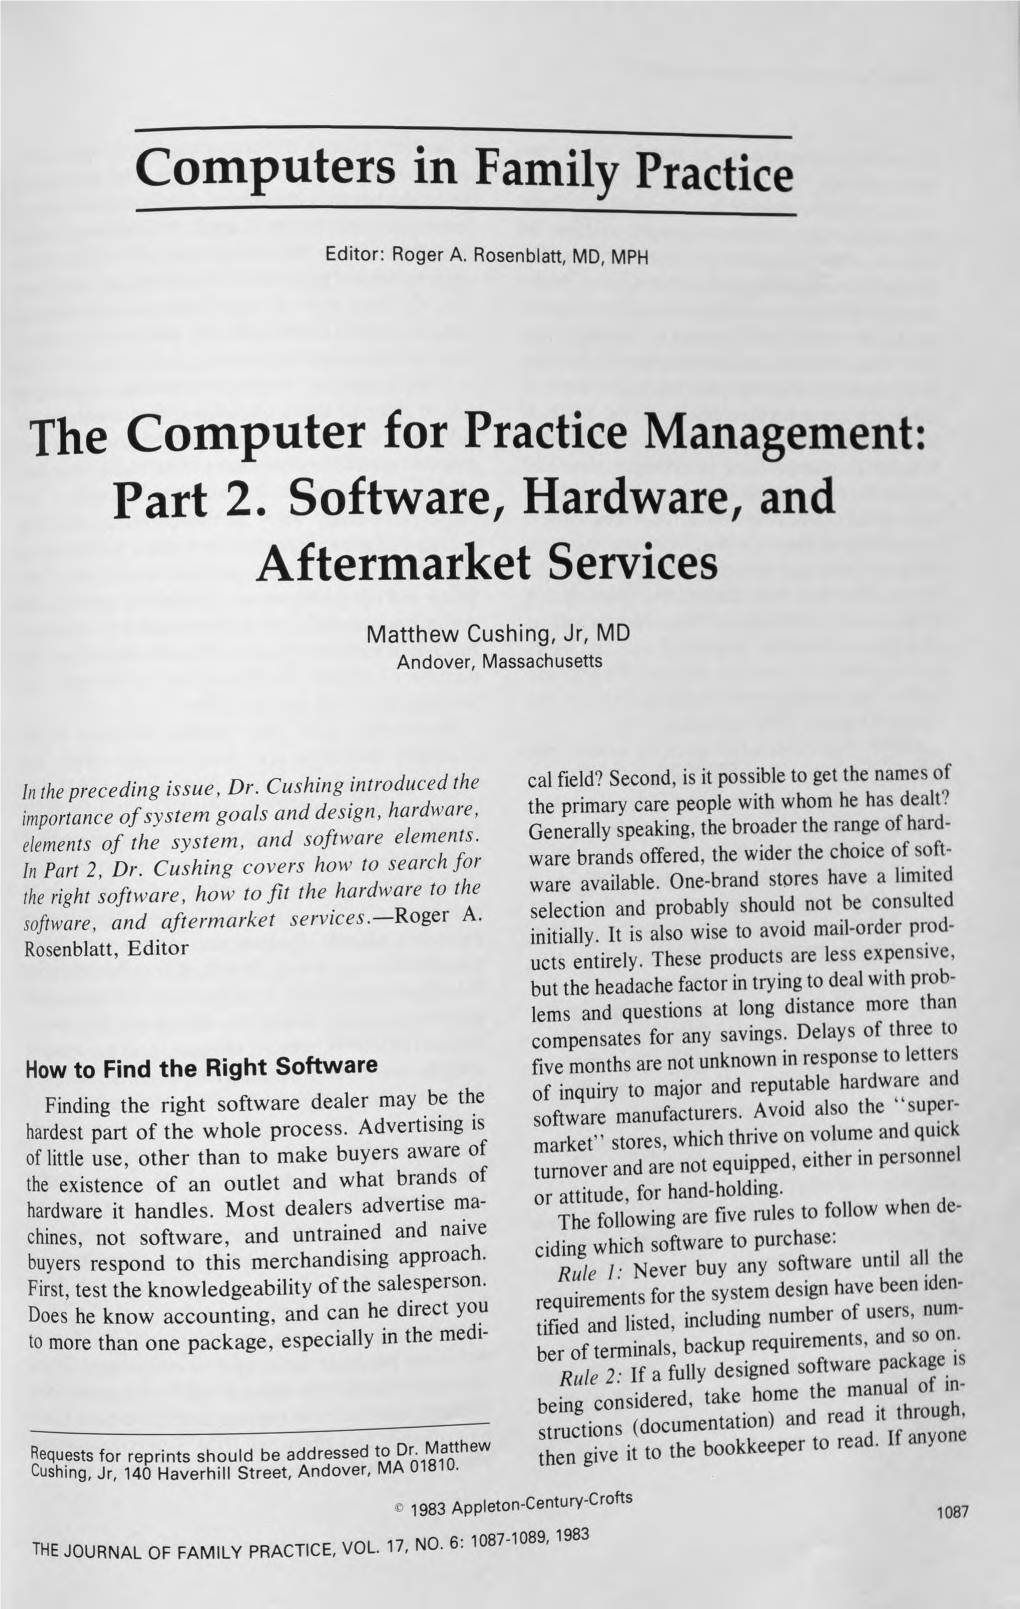 The Computer for Practice Management: Part 2